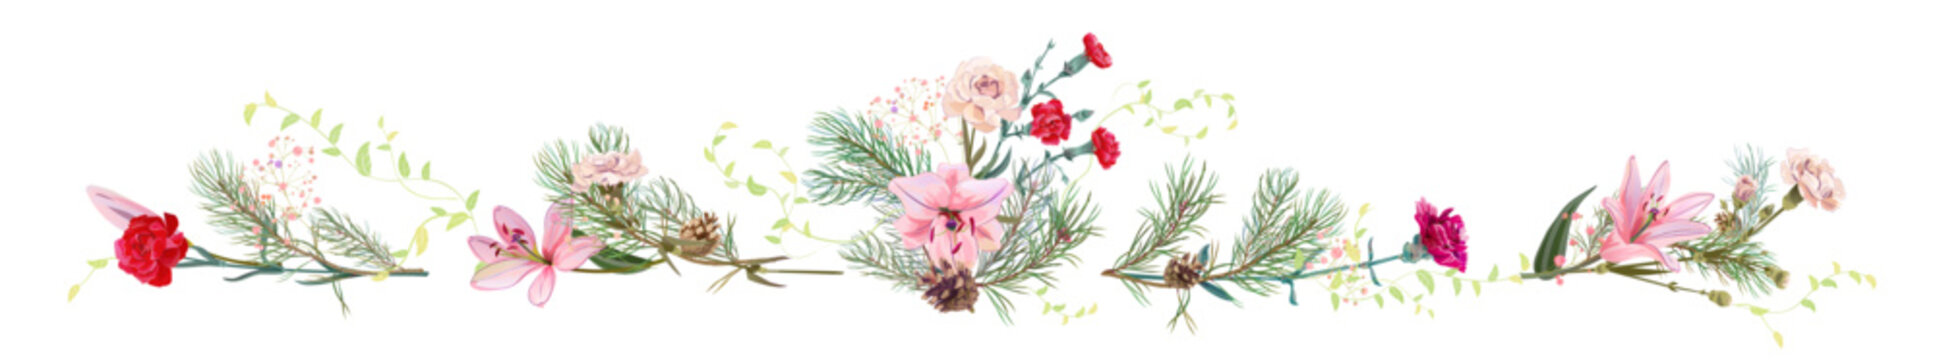 Horizontal panoramic border with pine branches, cones, needles, white lilies, and carnations flowers. Realistic digital Christmas tree in watercolor style. Botanical illustration for design, vector